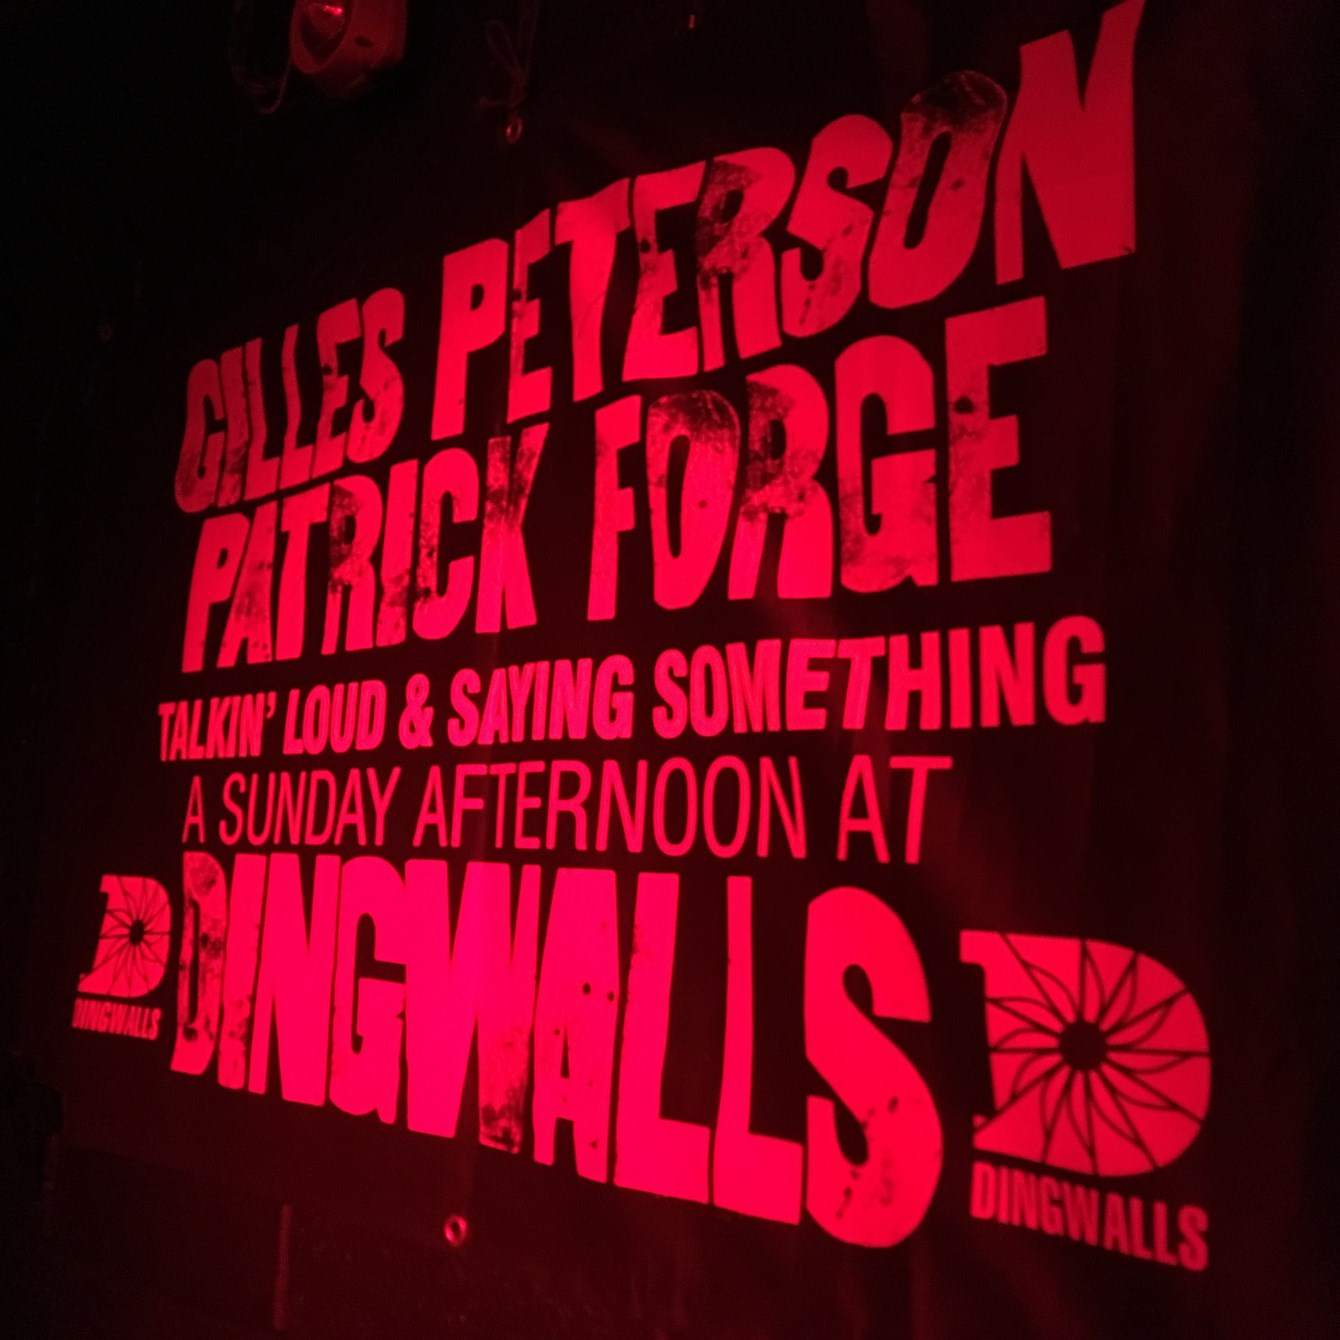 Gilles Peterson & Patrick Forge present Another Sunday Afternoon - Página frontal